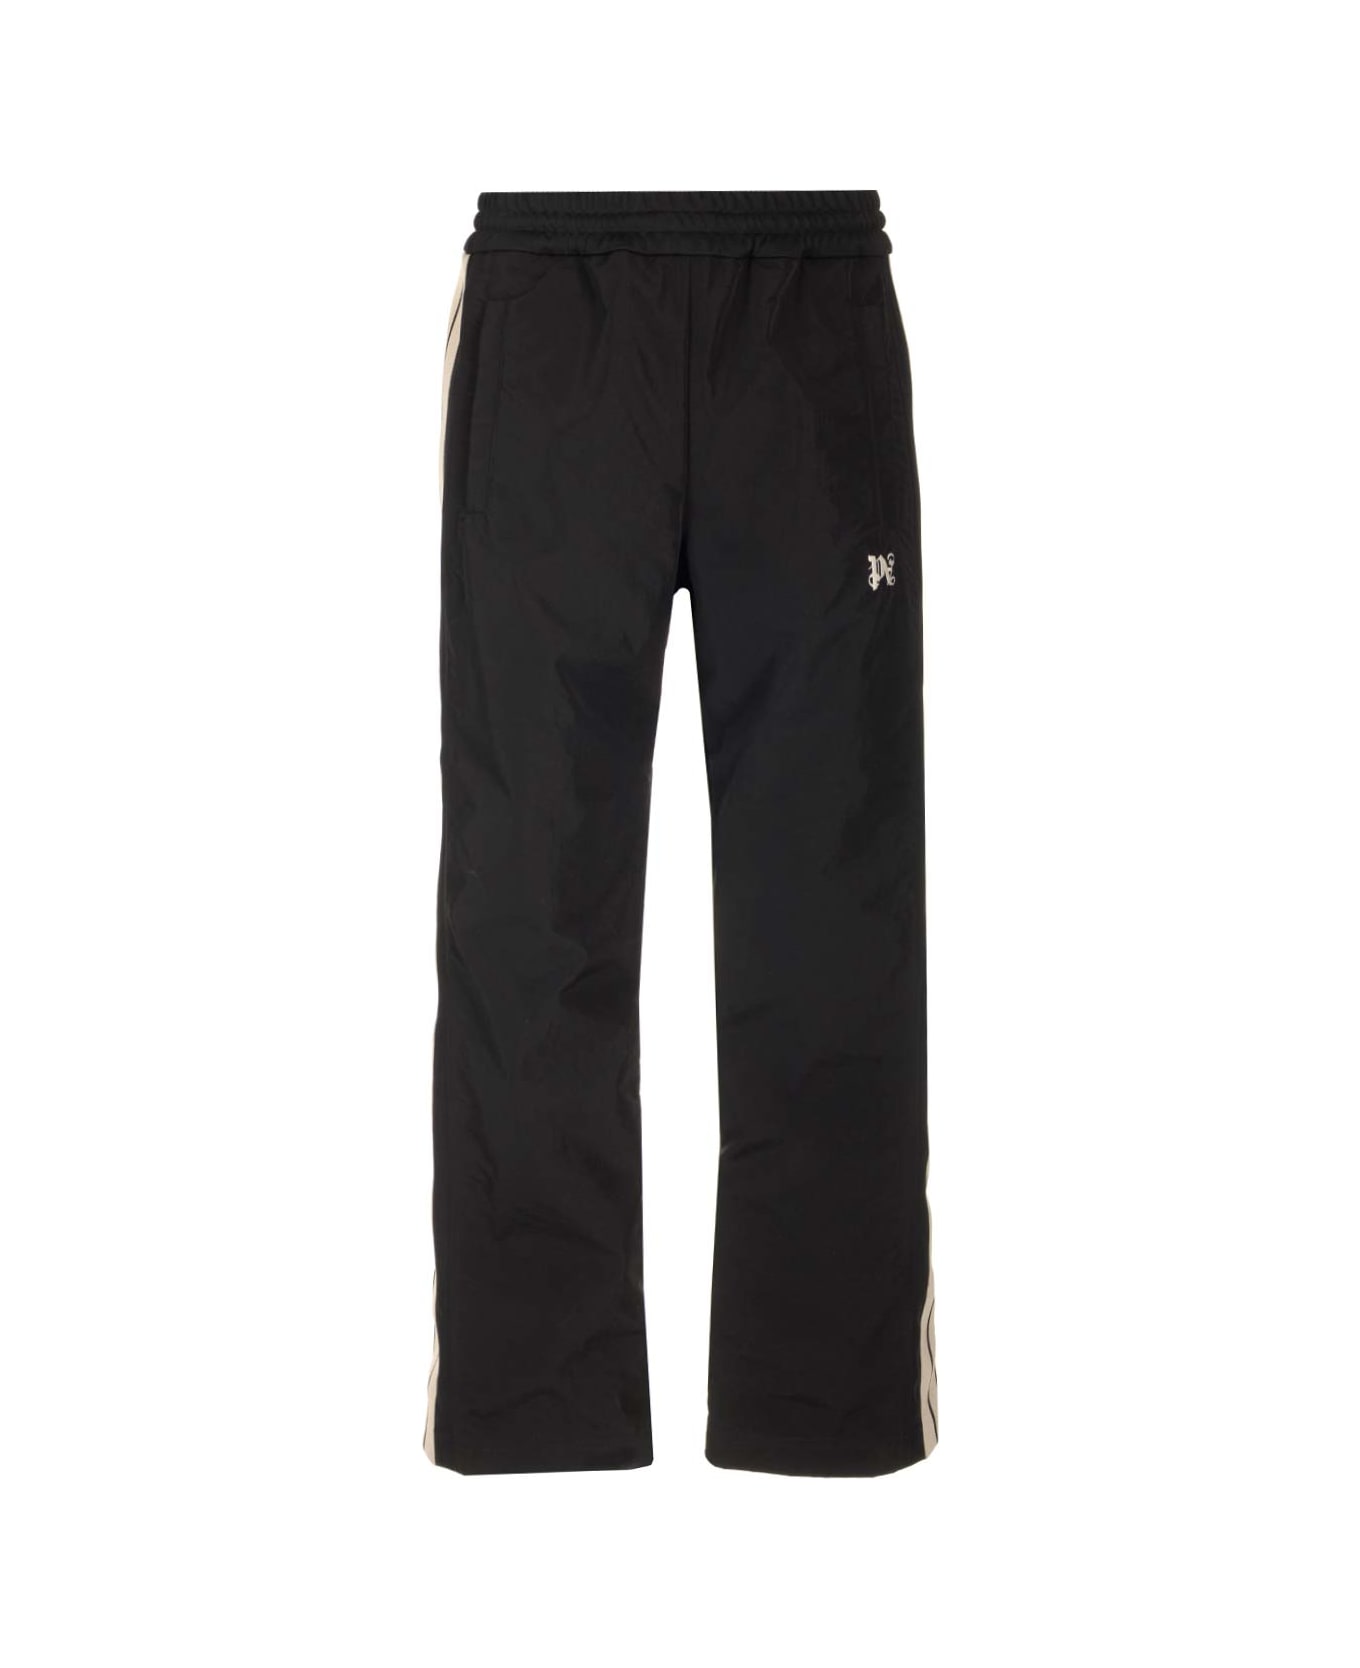 Palm Angels Nylon Track Pants With Bands - Black ボトムス